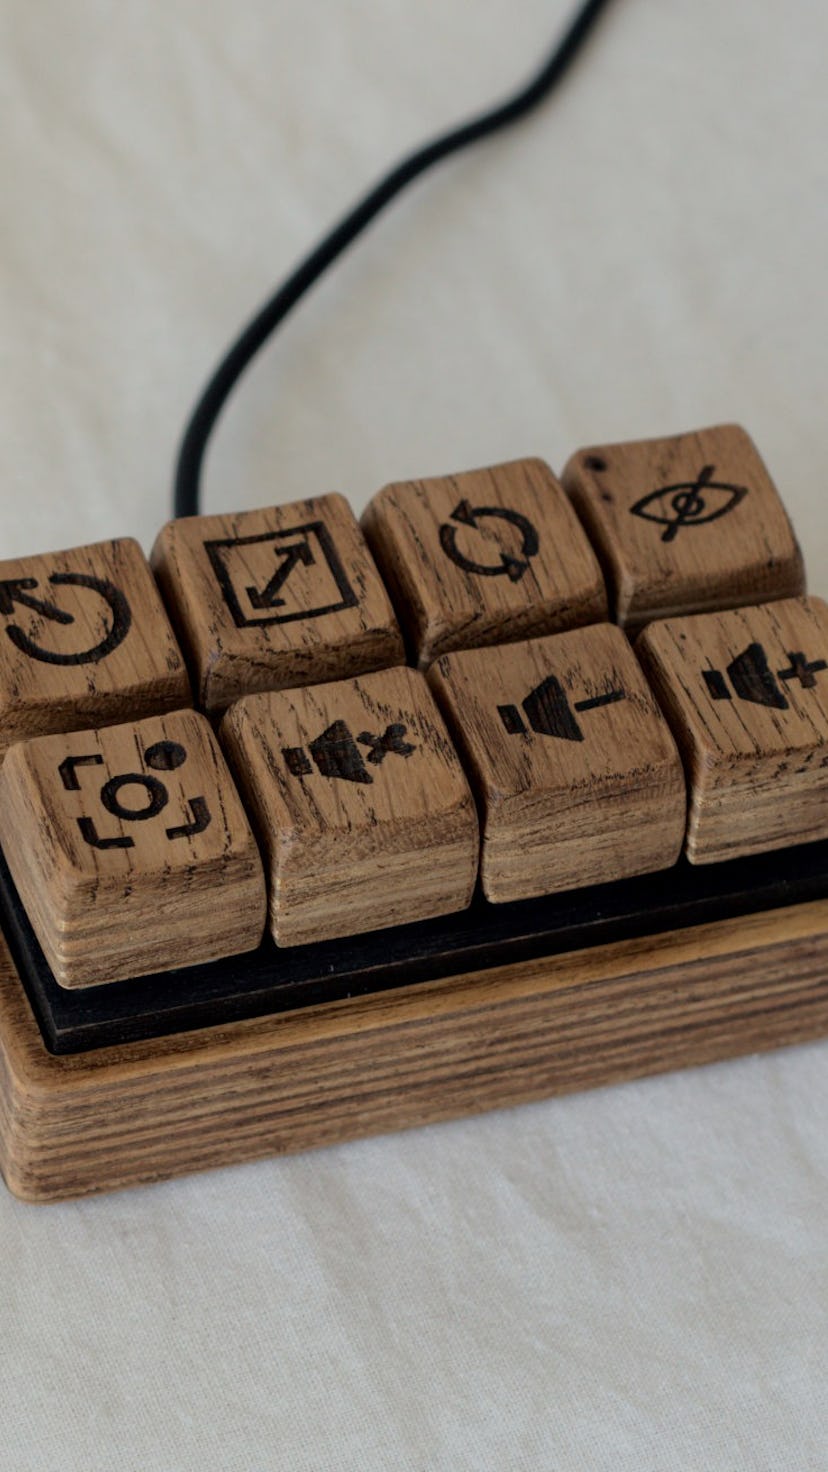 Someone made a mechanical keyboard out of wood.